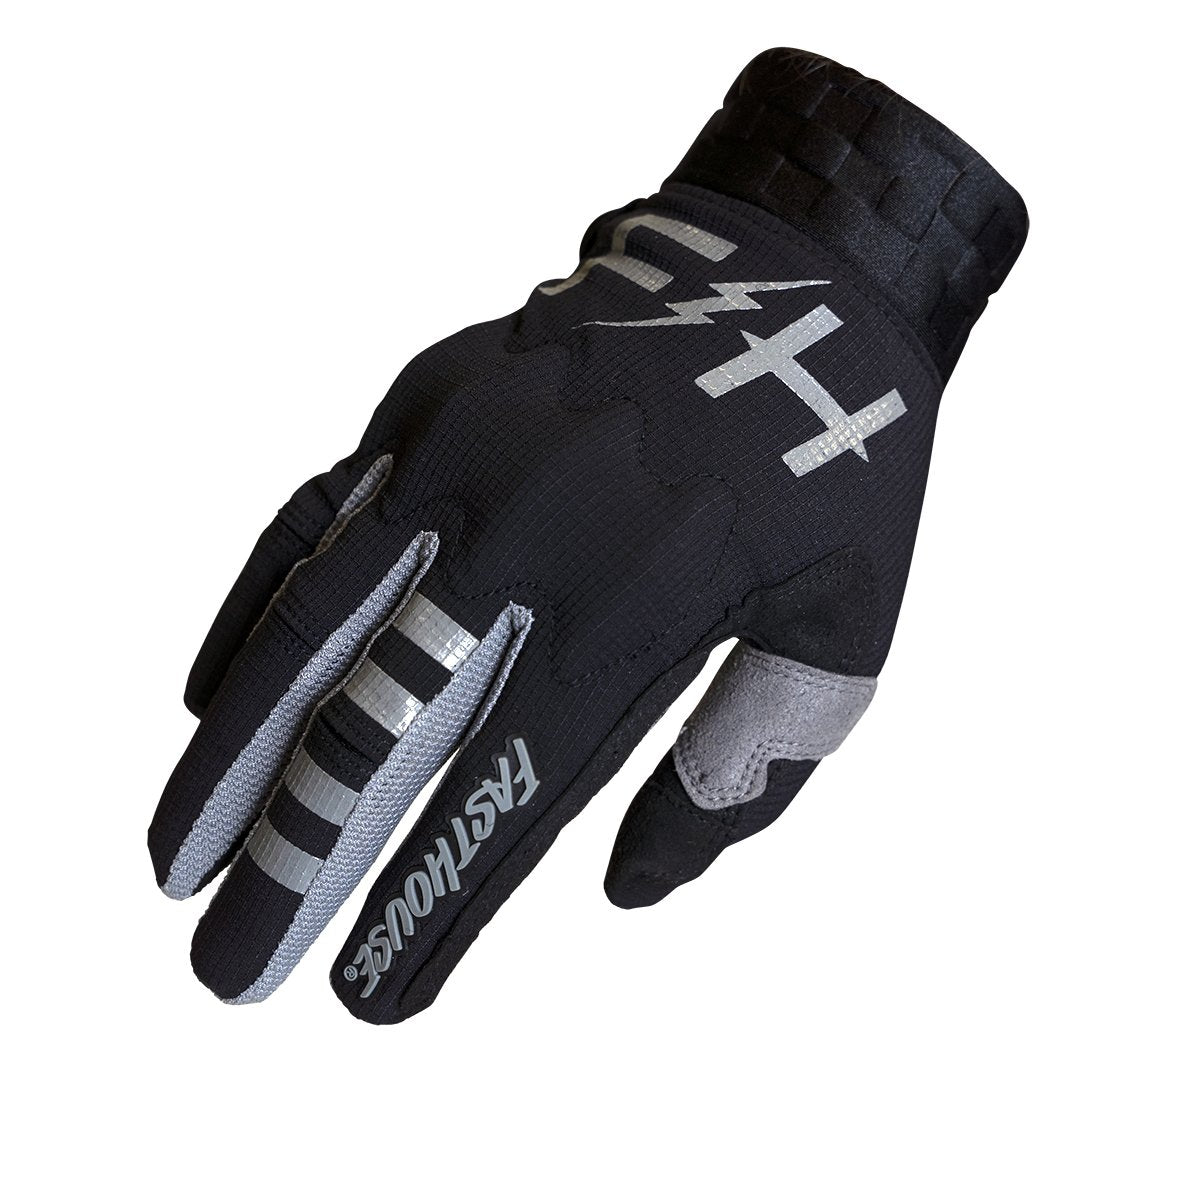 Fasthouse Off-Road Blaster Gloves